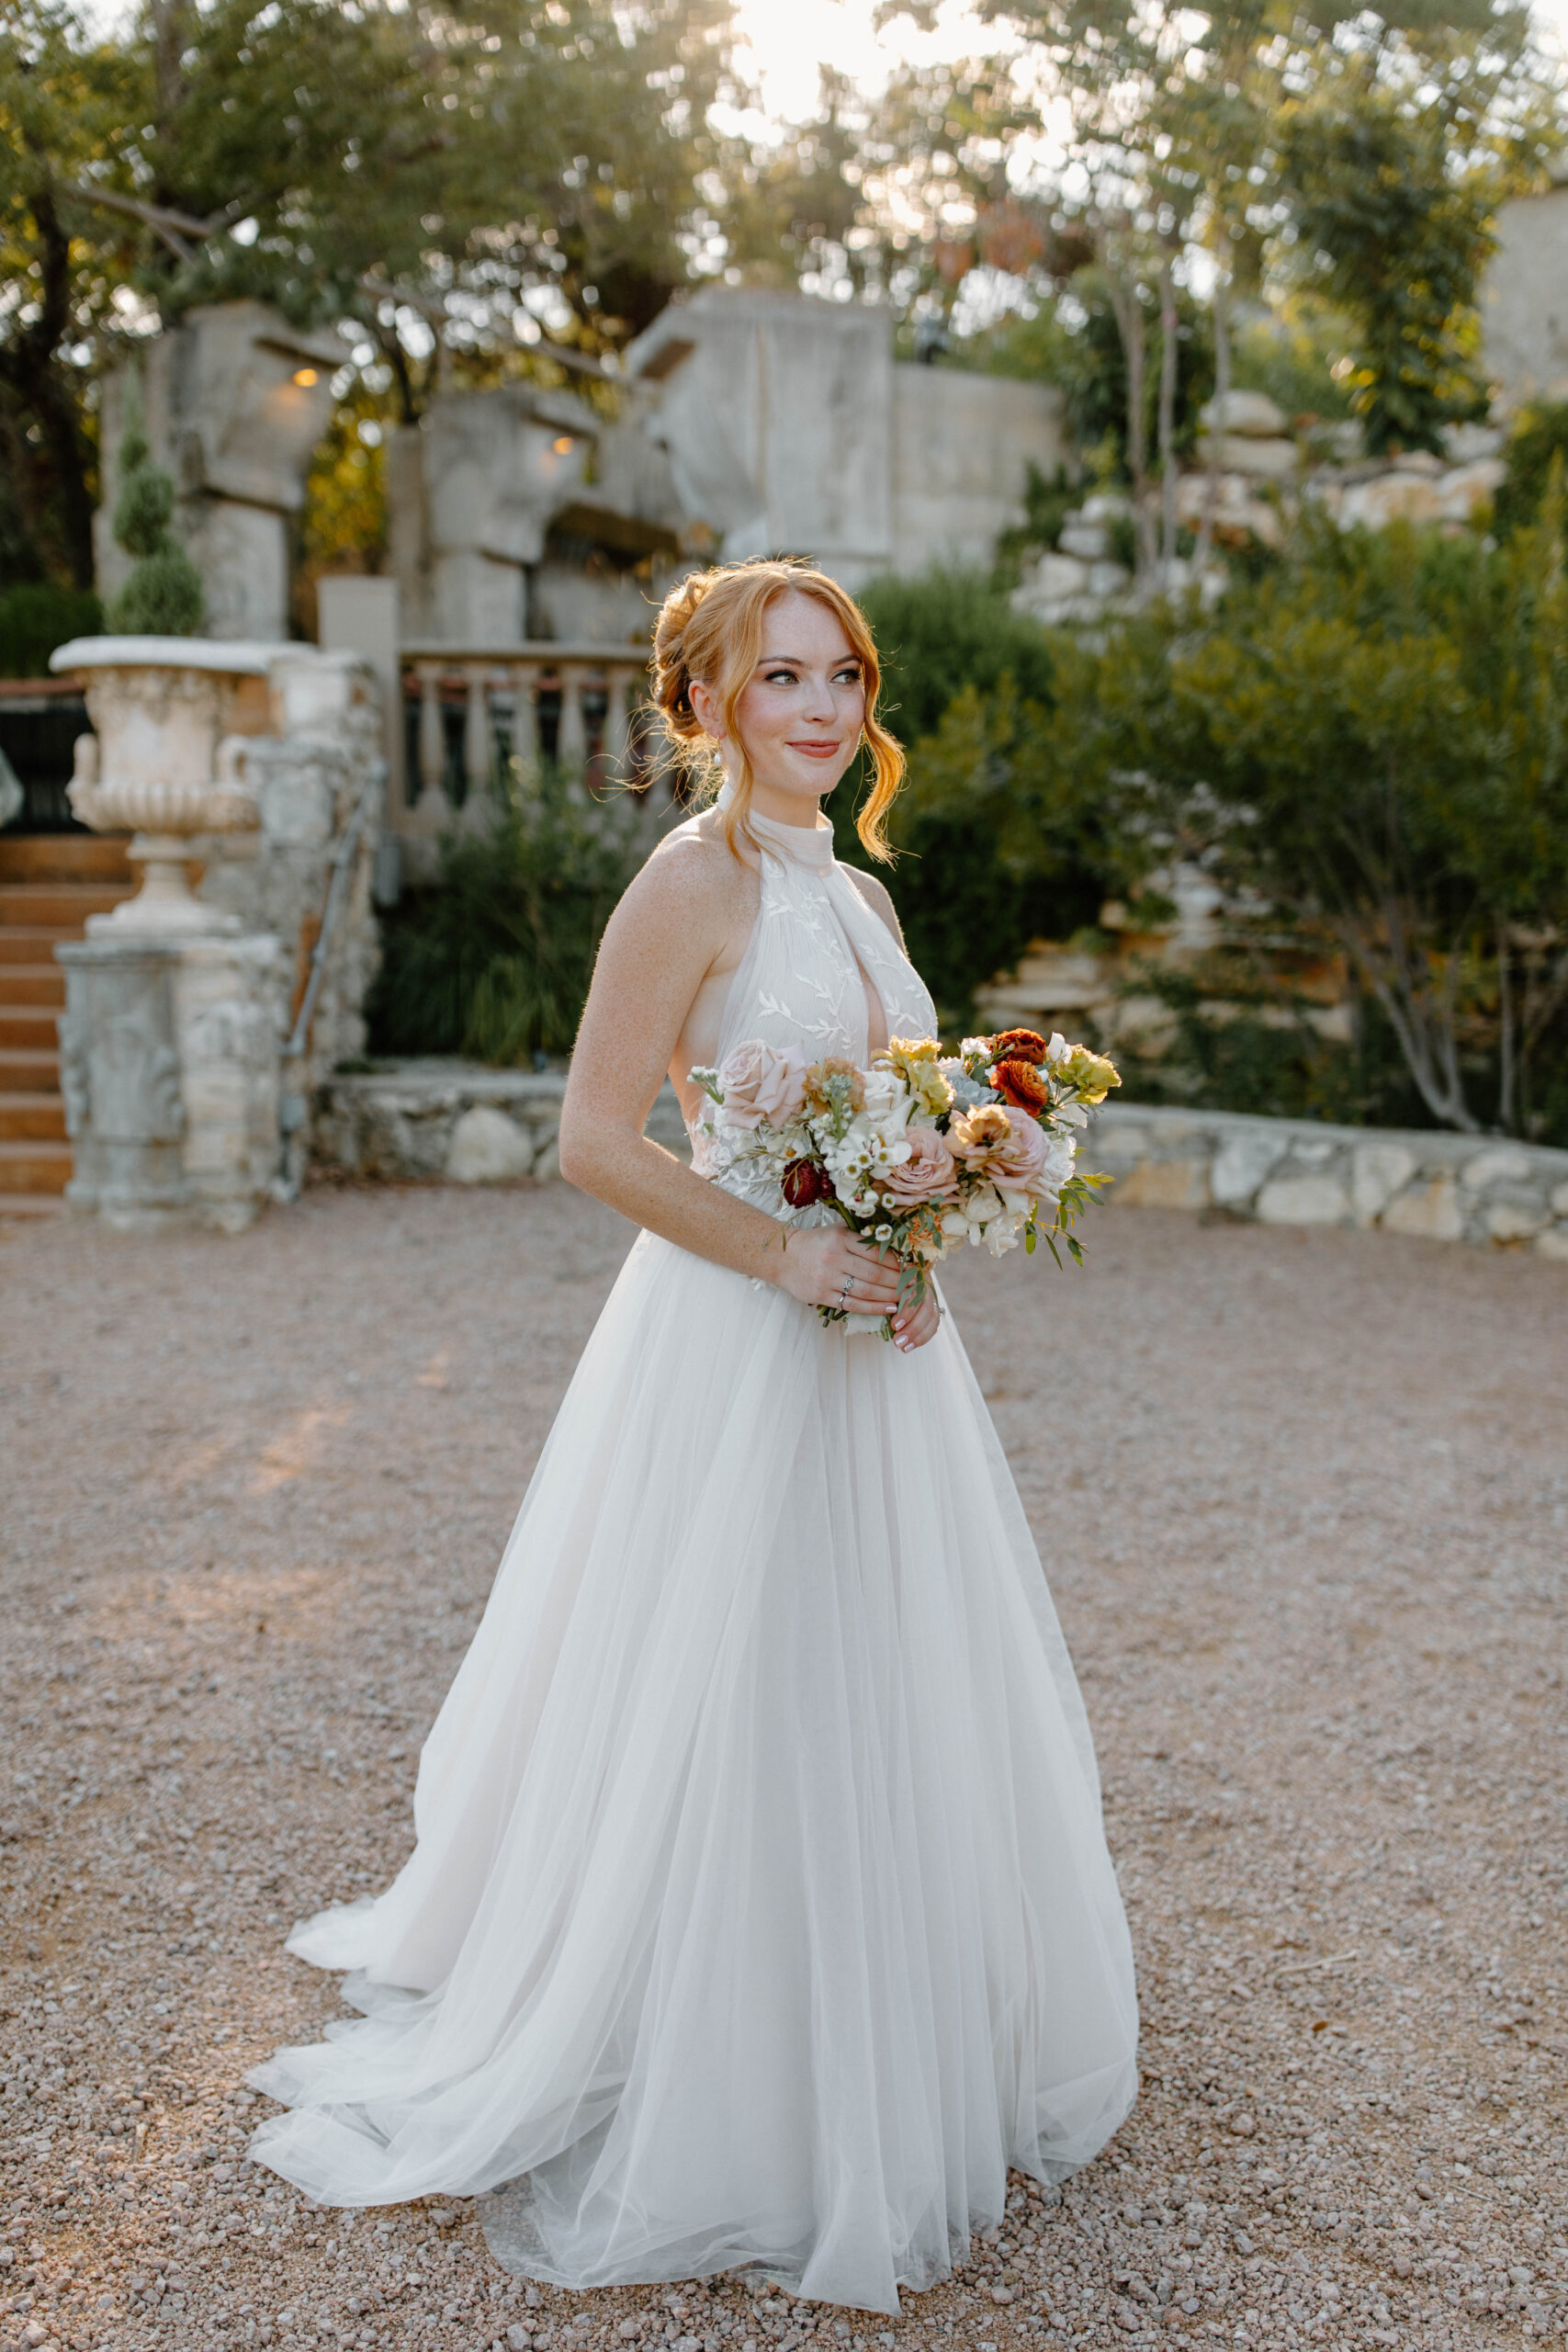 Bridal Portraits taken at Villa Antonia. A red haired bride in a halter neck wedding gown, featuring an autumn bouquet of roses. Courtyard wedding photos. 